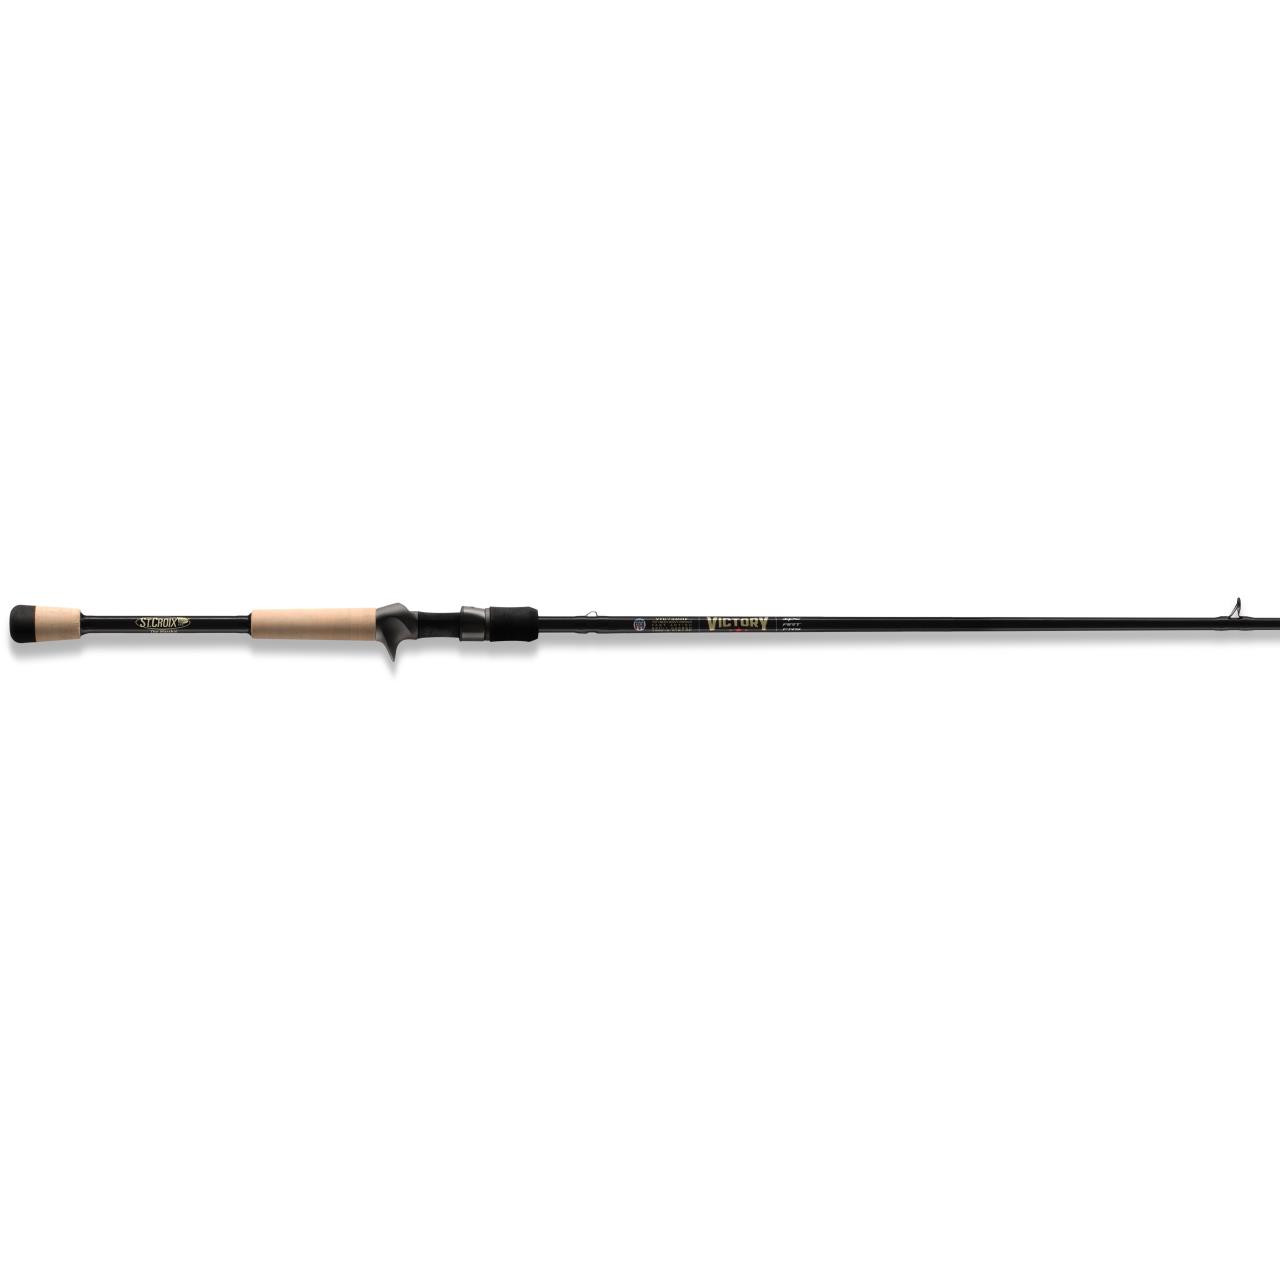 St Croix Victory Casting Rod 7'3 - Medium Heavy Power - Fast Action